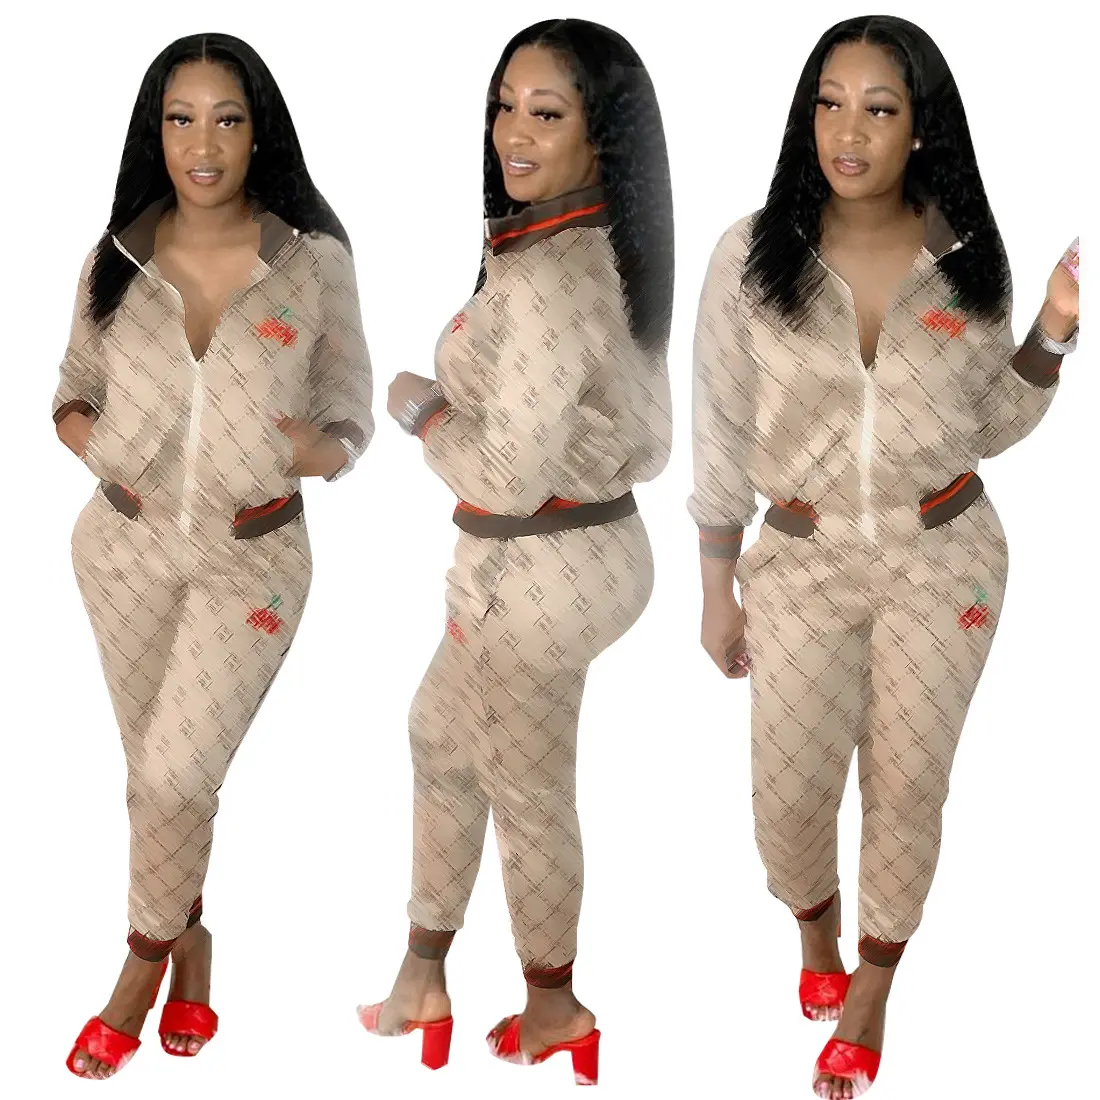 New embroidered casual digital printing women's two piece set women clothing 2022 hot selling for designer brand clothing